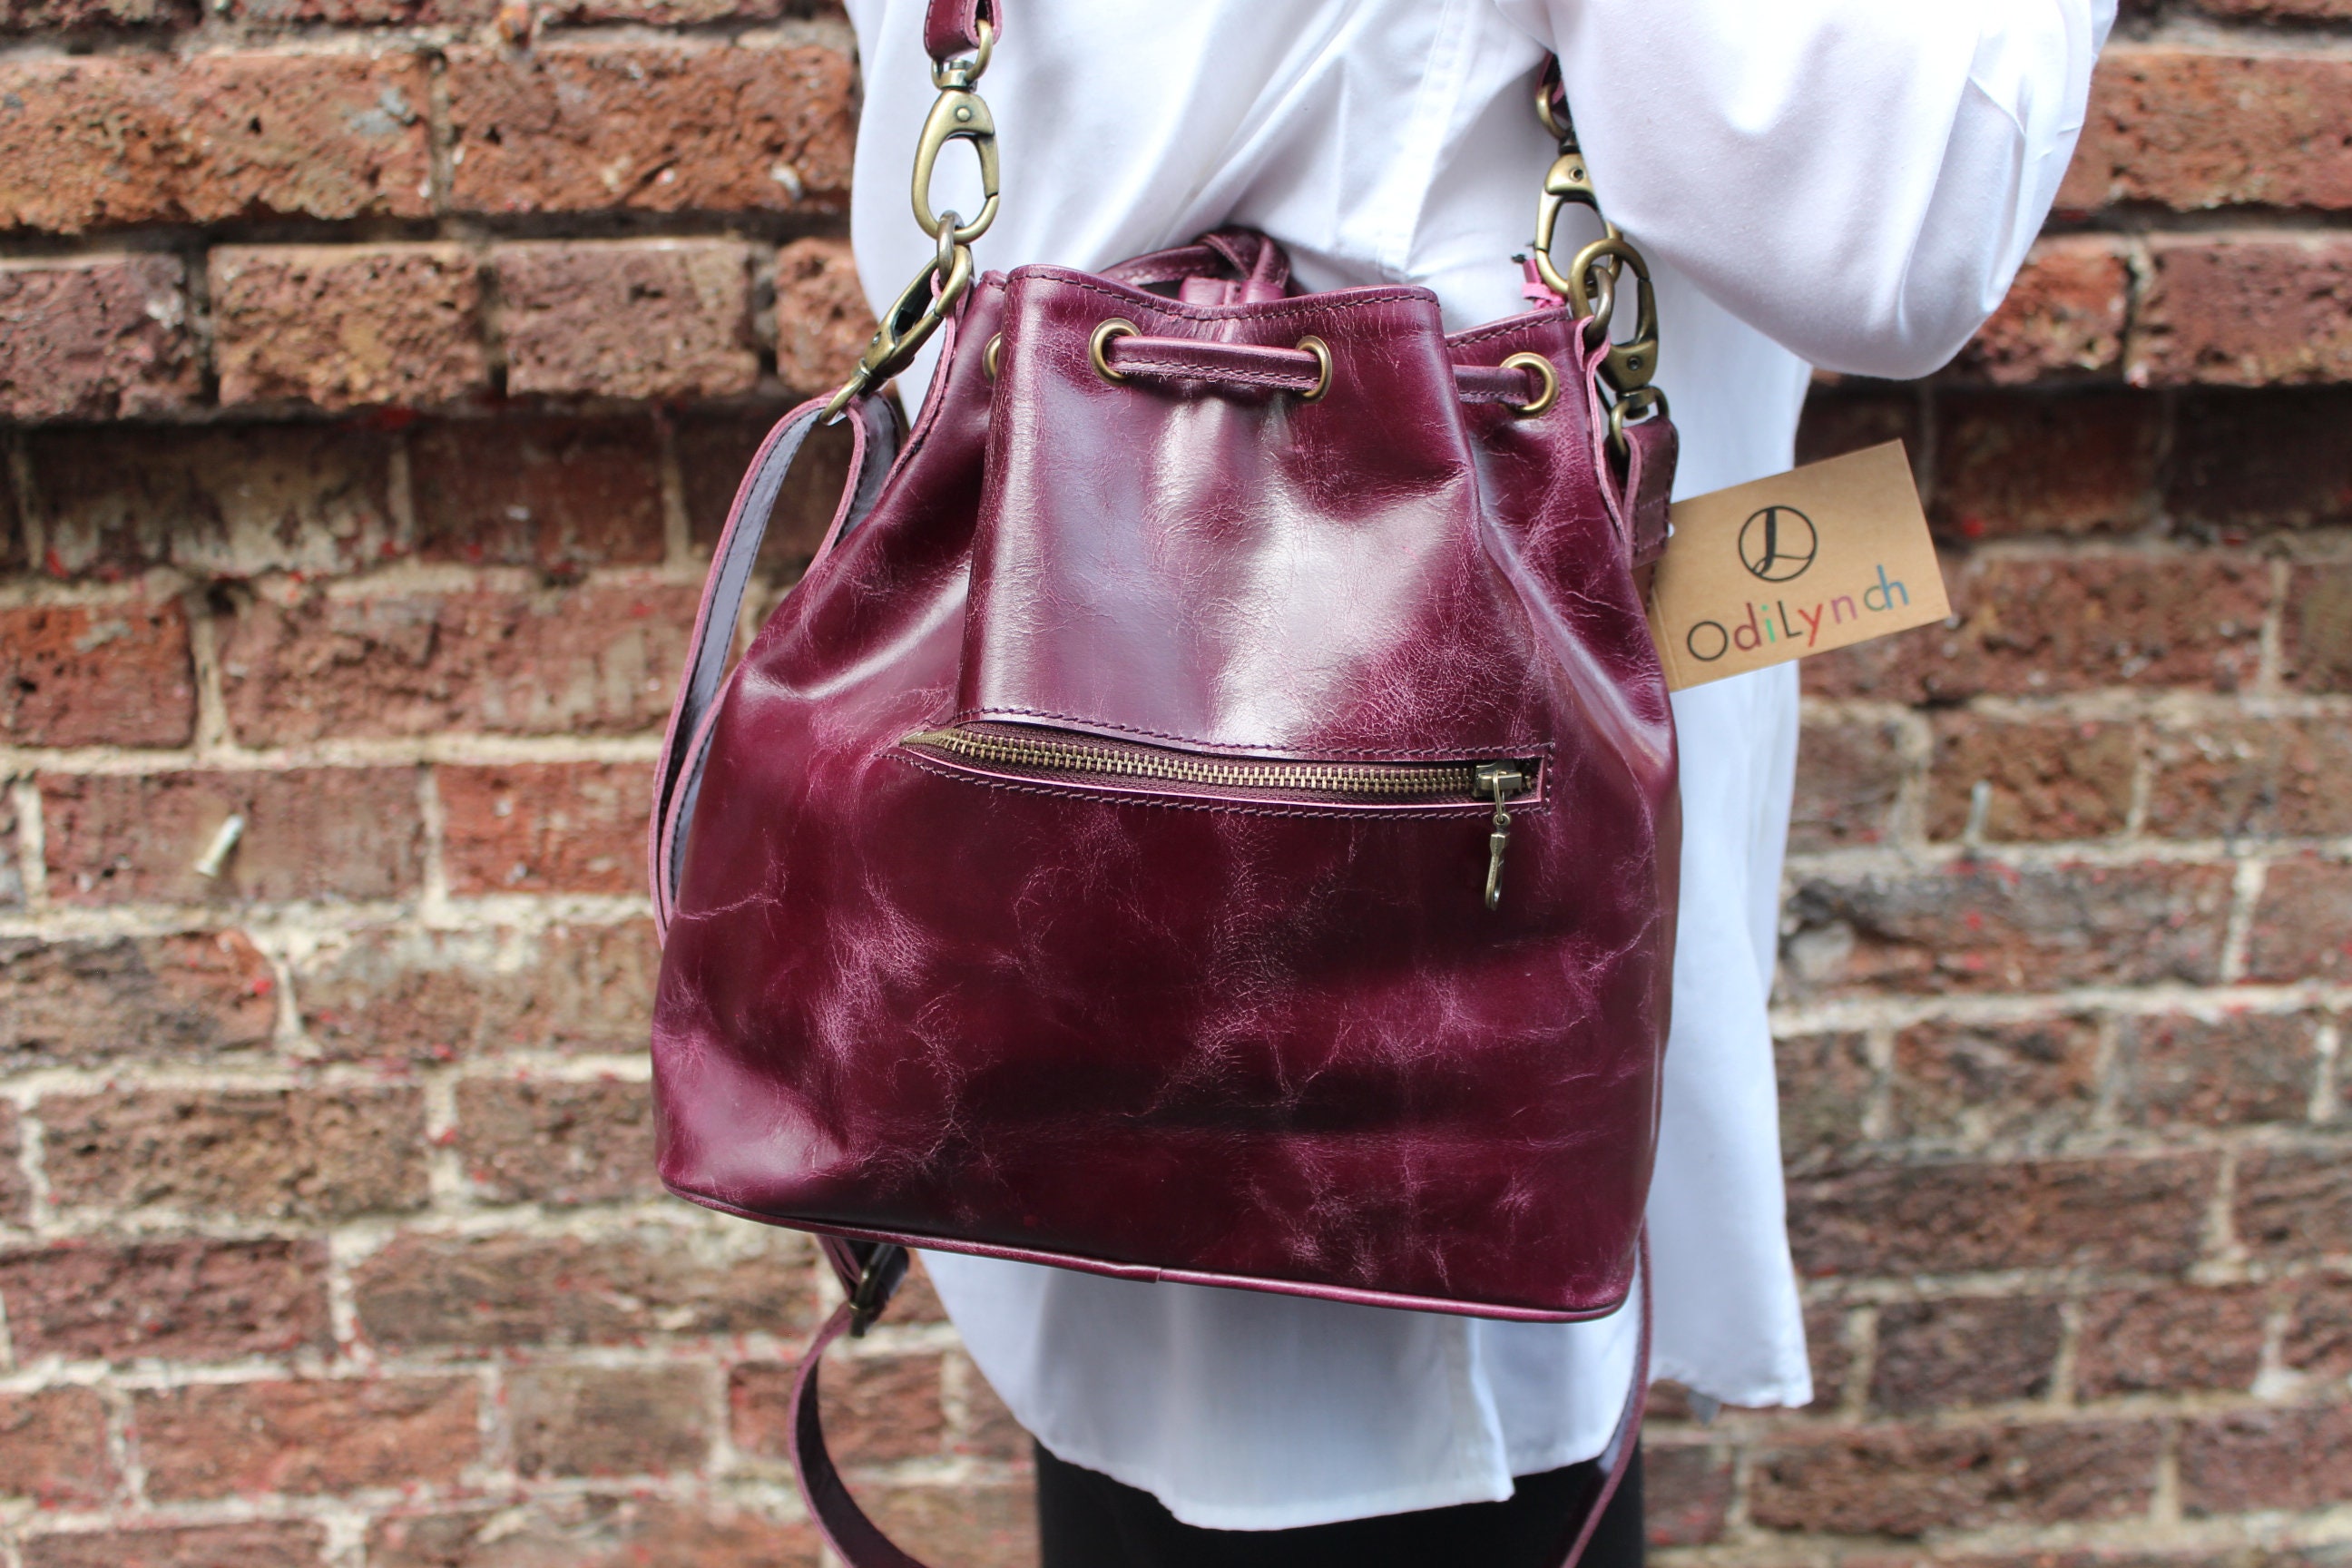 Burgundy Genuine Leather Shoulder Bucket Bags Work Bags with Chain